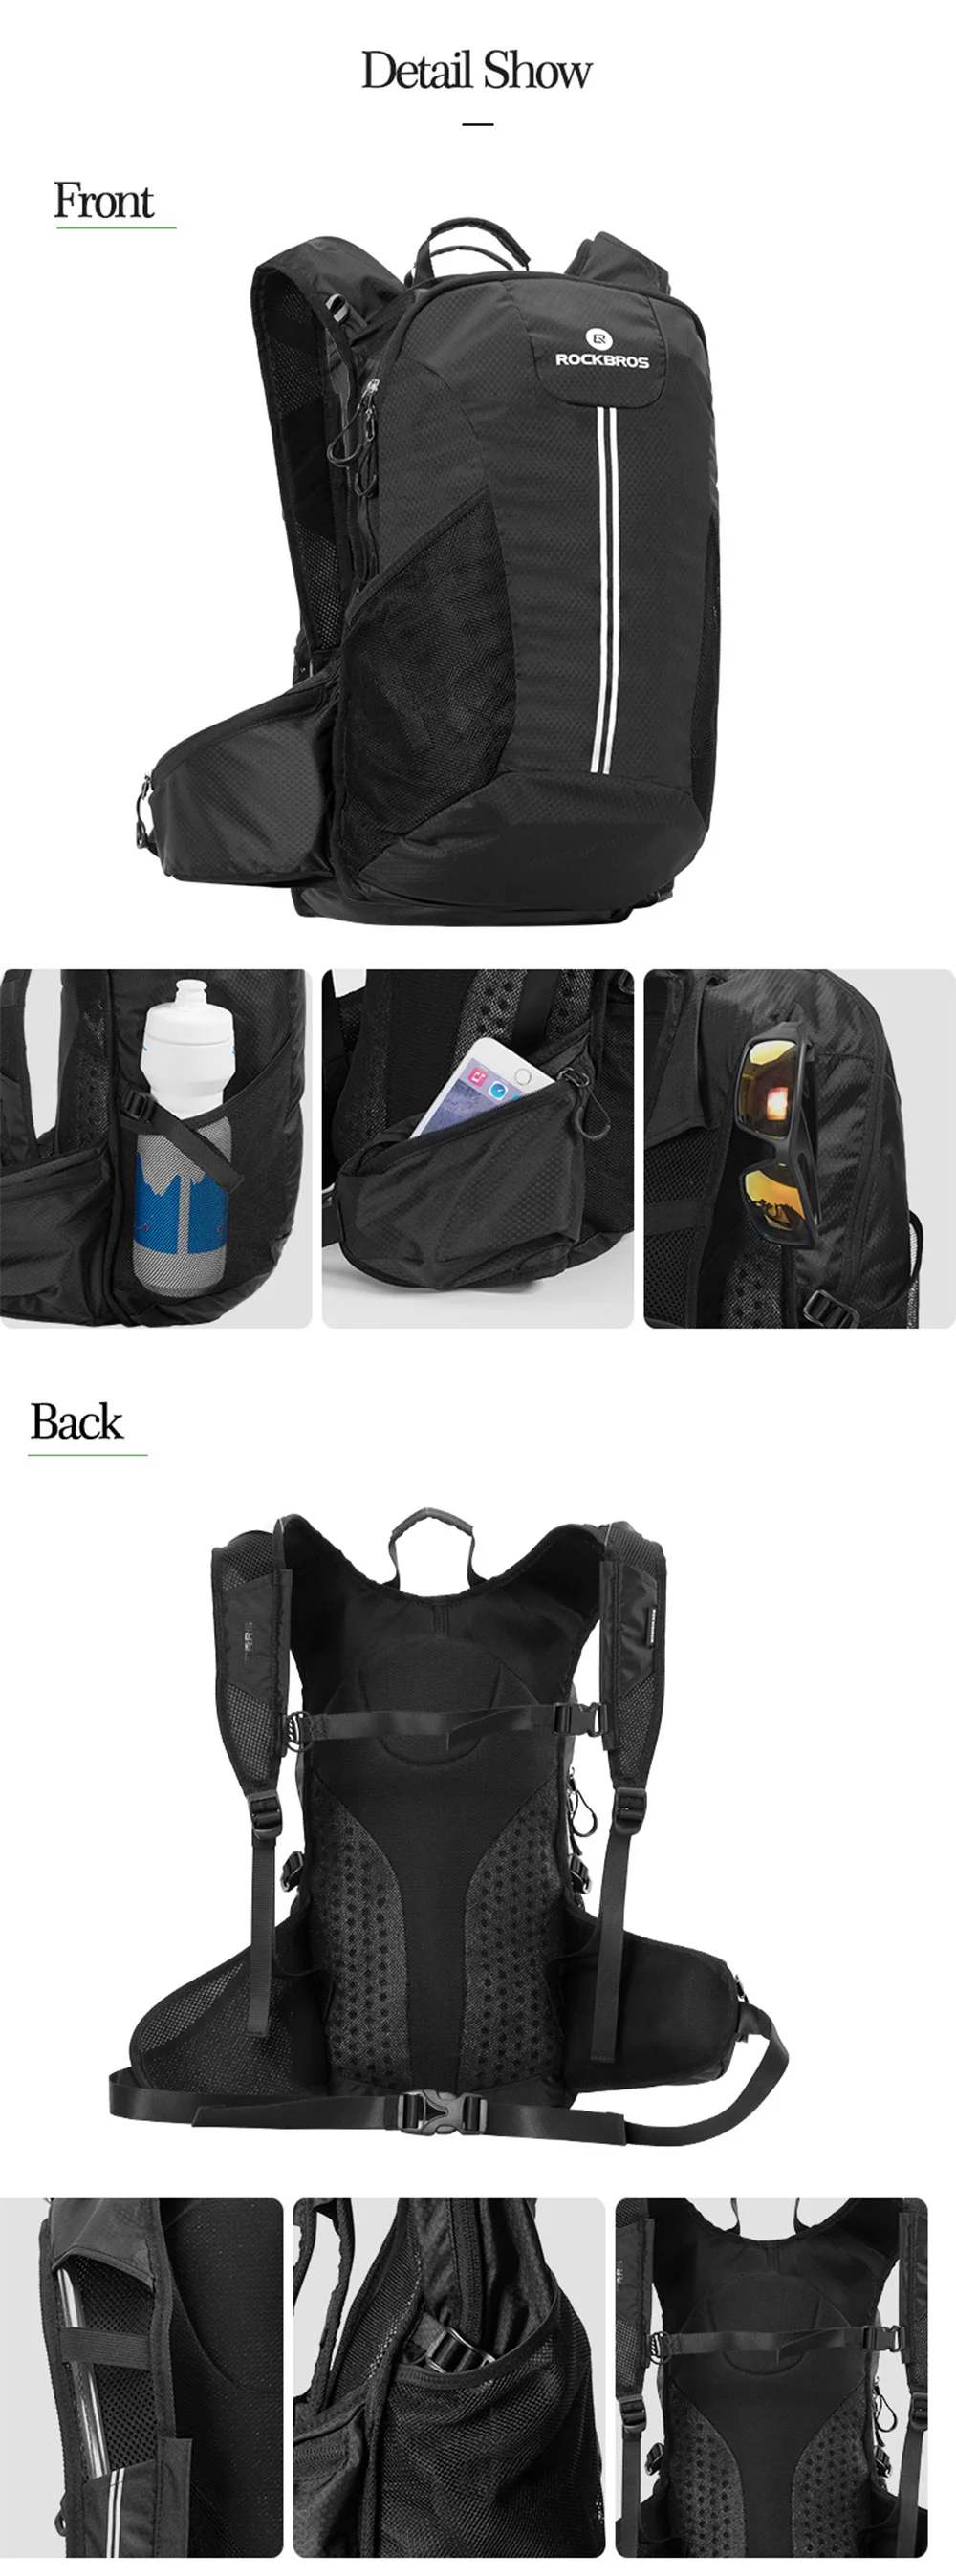 Rockbros Made in China Quality Hot Sale Outdoor Sports Cycling Hiking Camping Mountaineering Daily Training Backpack